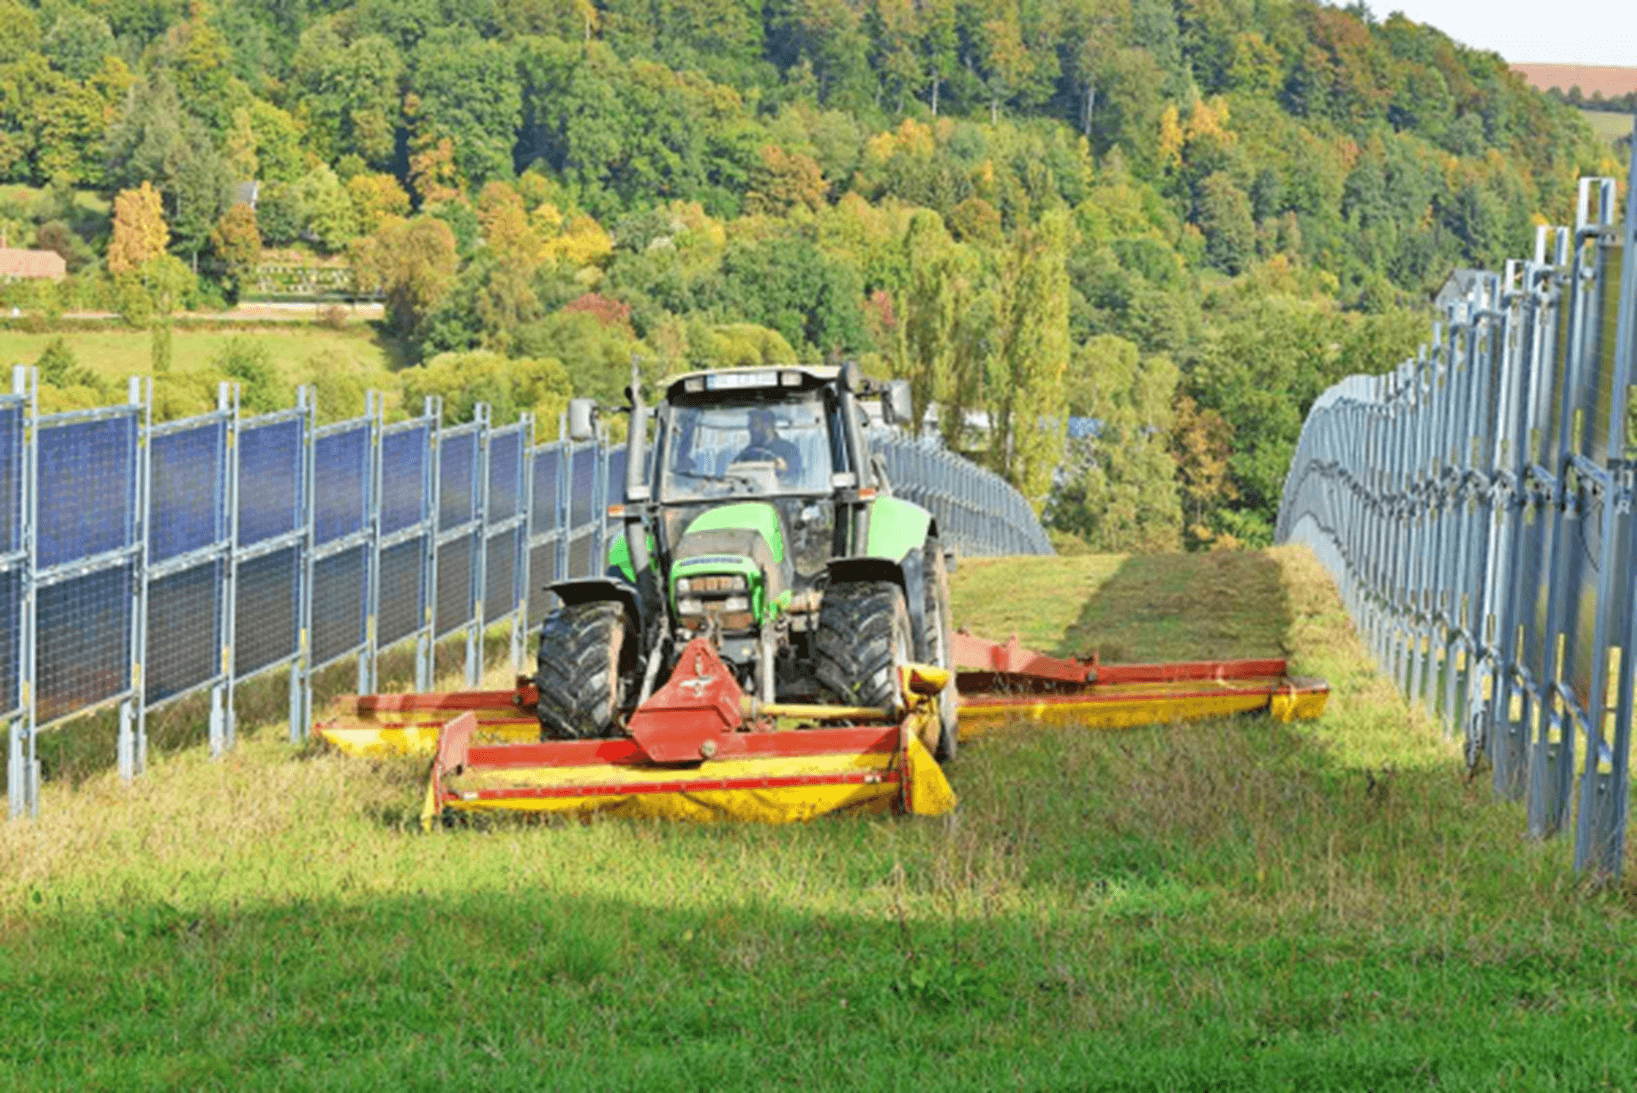 Agrivoltaics - potential for dual use of agricultural land